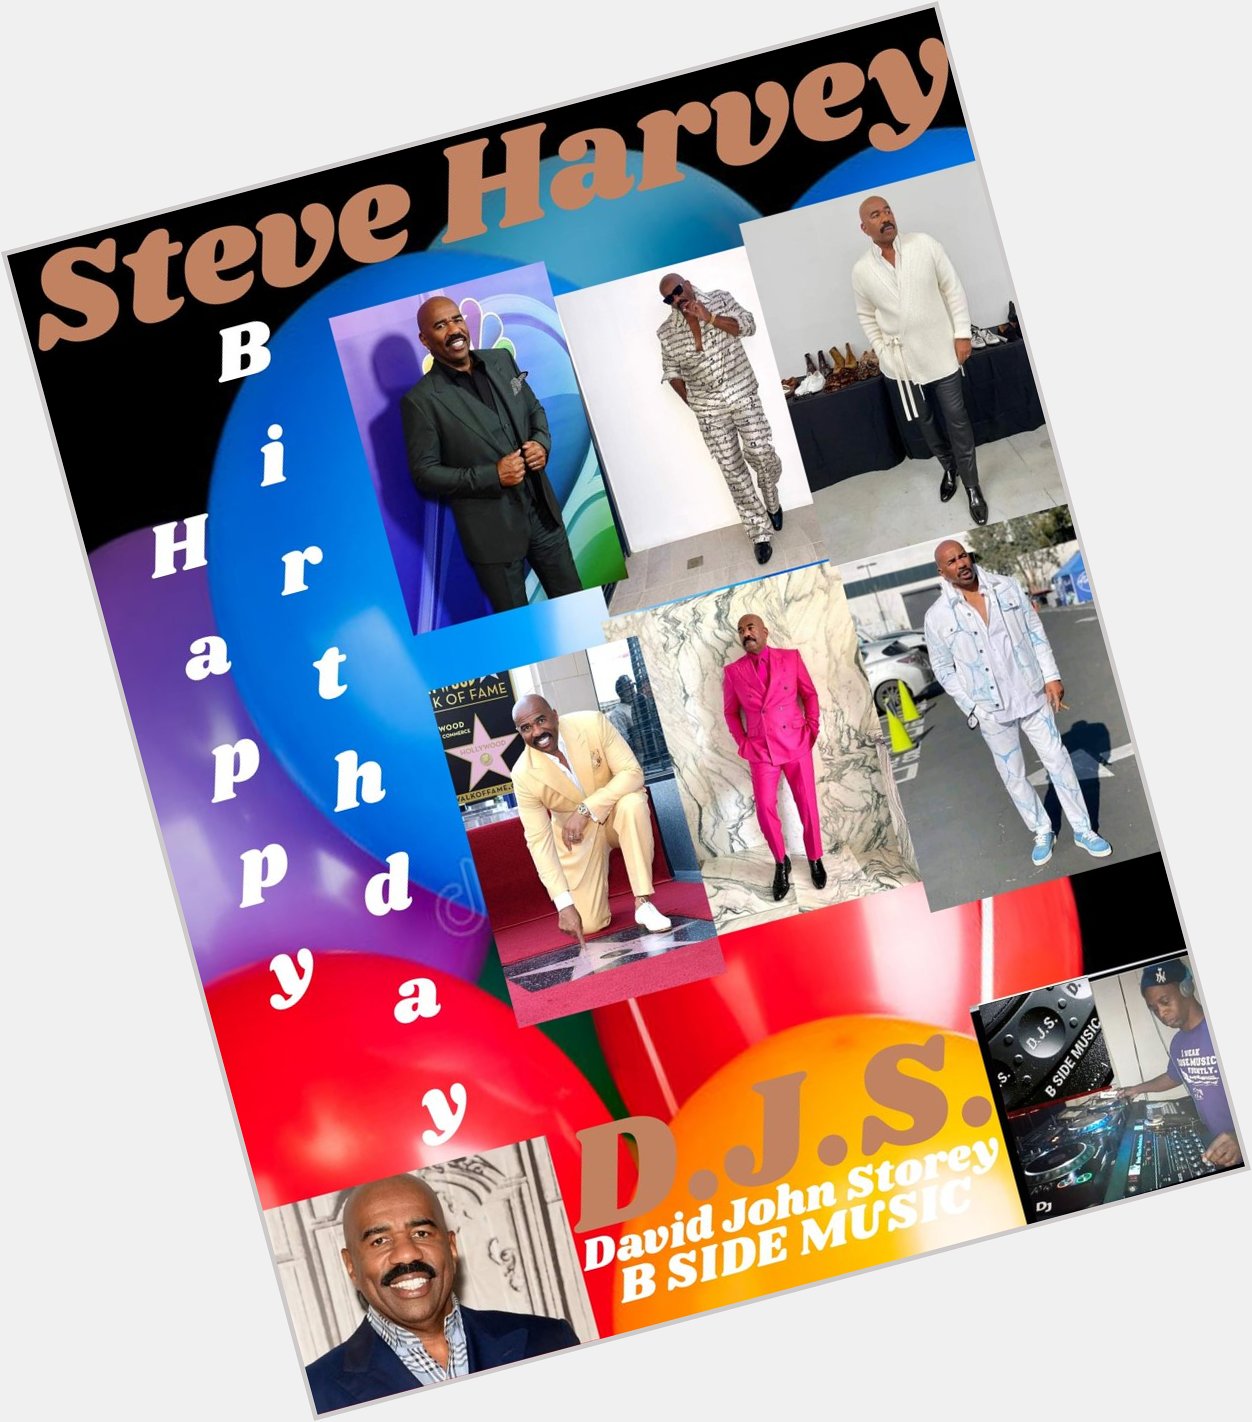 I(D.J.S.)\"B SIDE\" taking time to say Happy Birthday to Television Host/Producer/Actor/Comedian: \"STEVE HARVEY\"!!!!! 